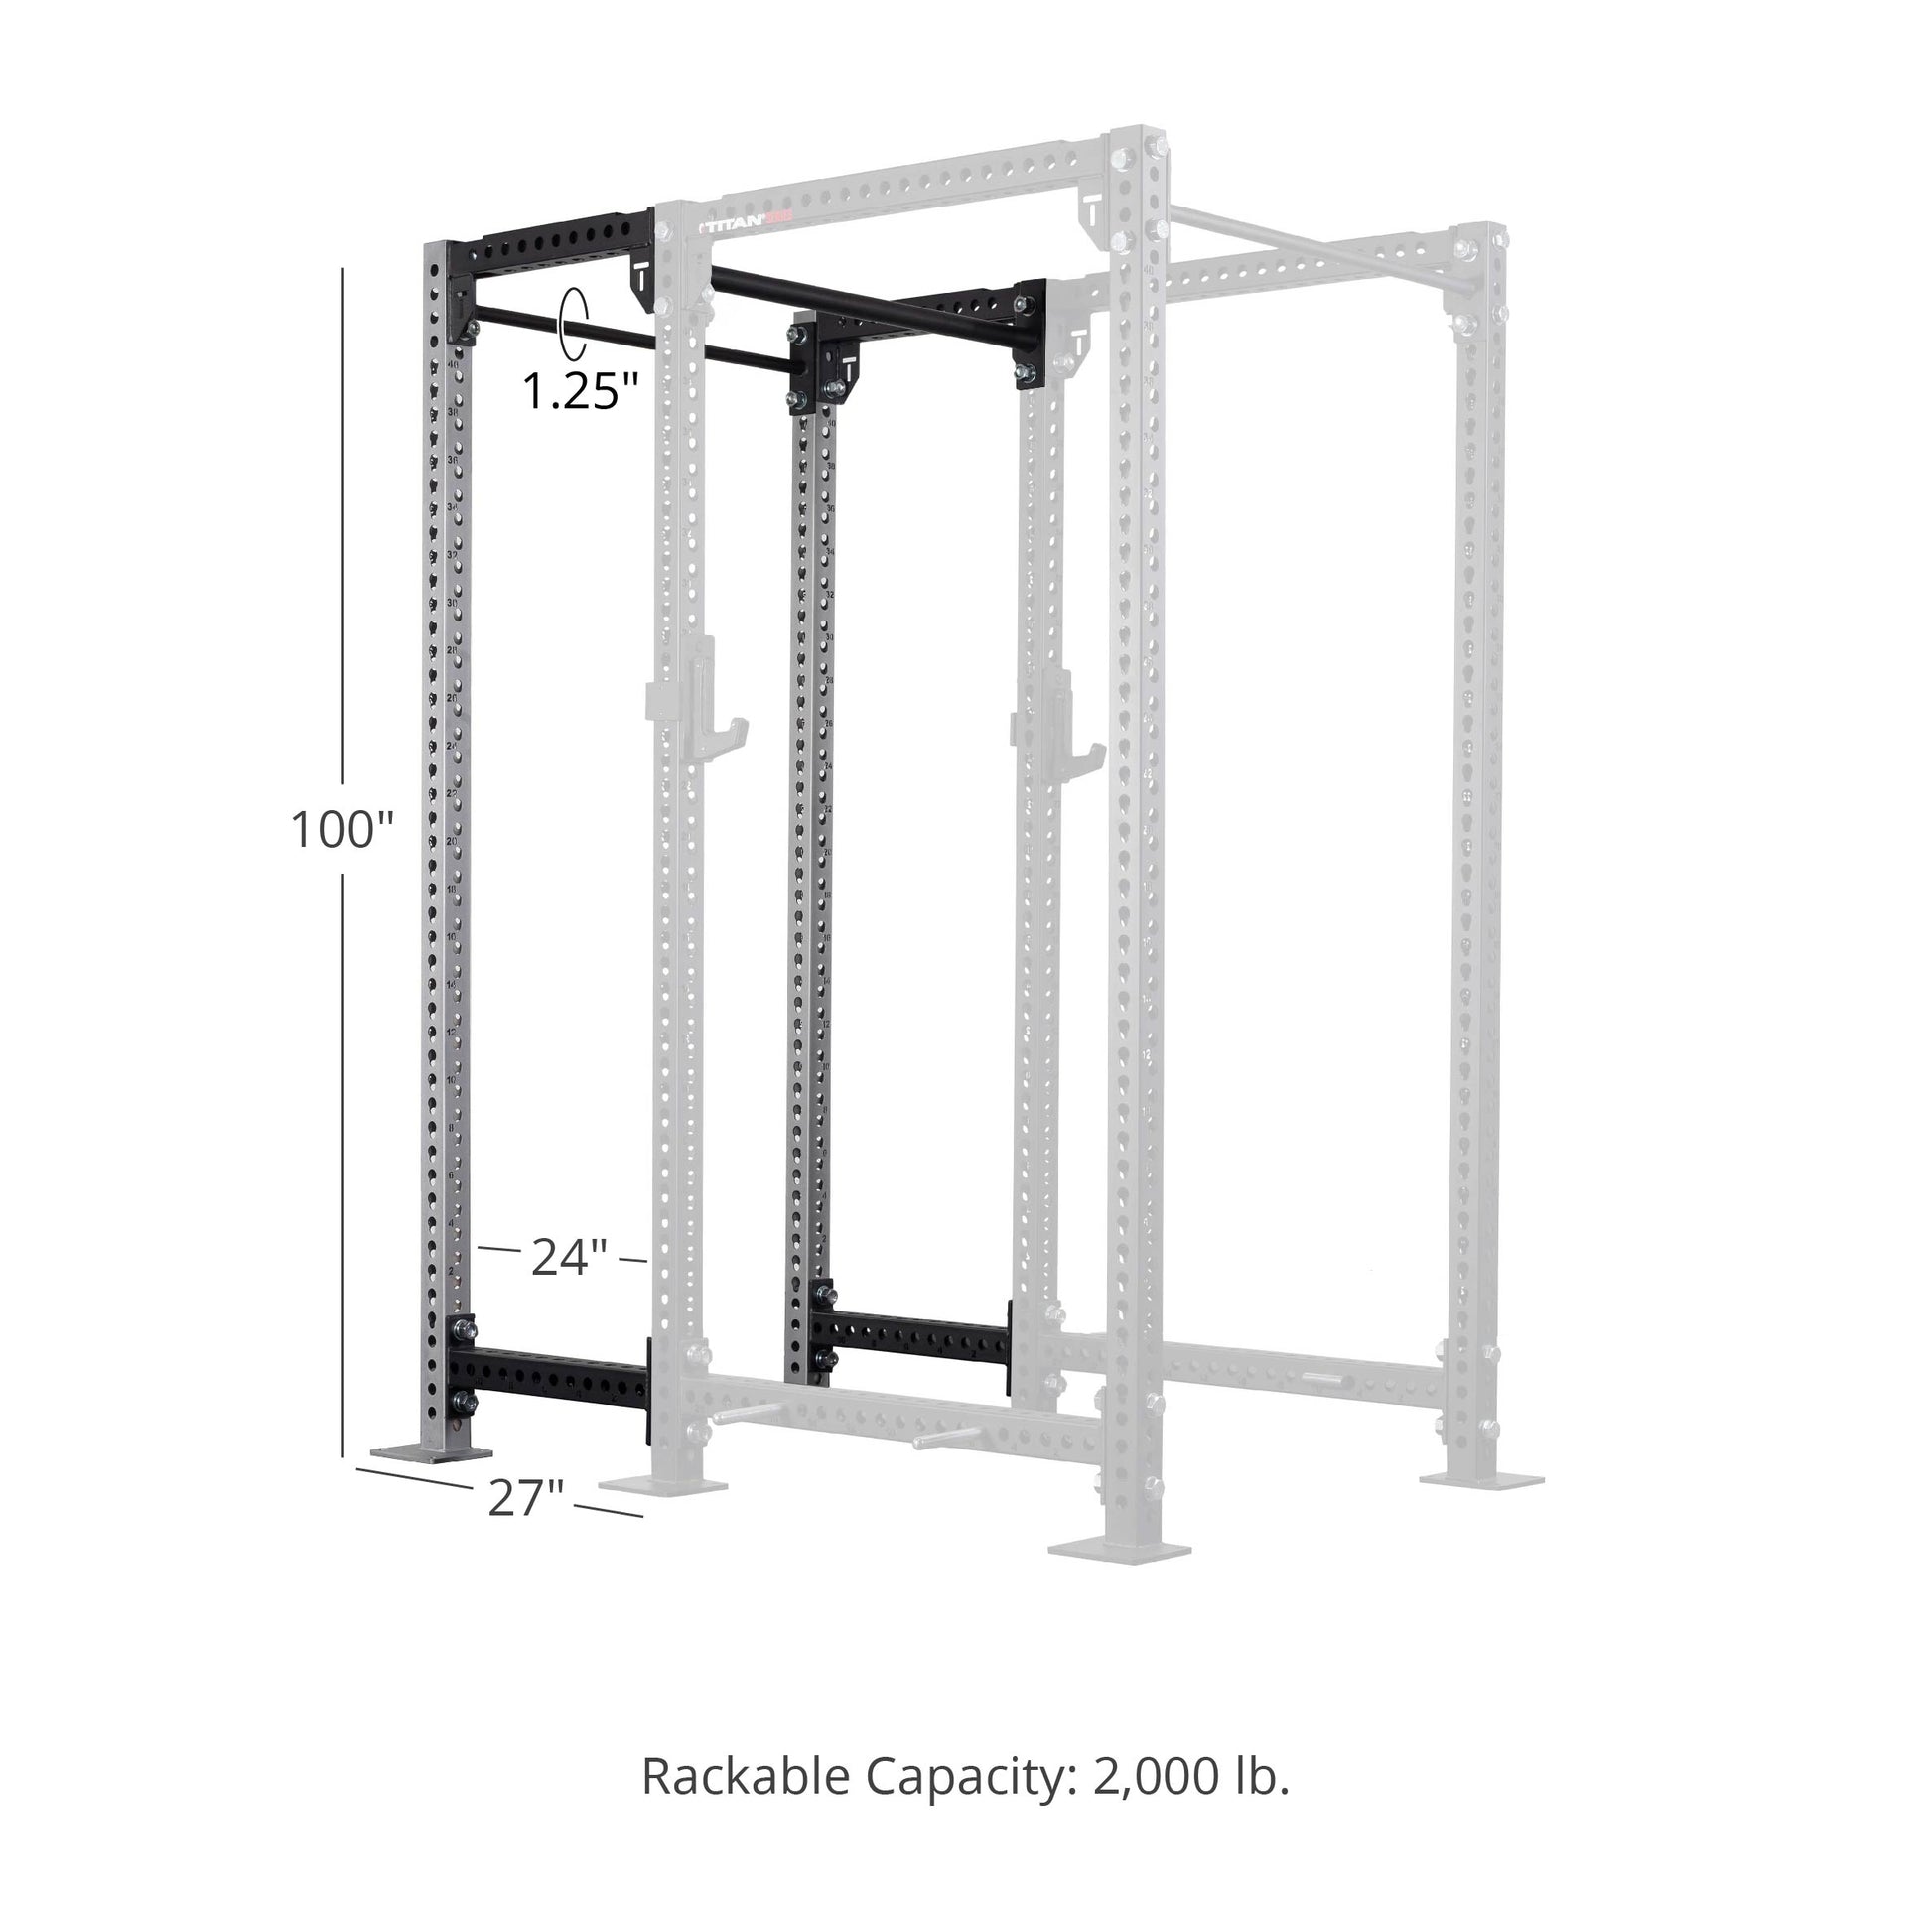 TITAN Series 24" Extension Kit - Extension Color: Silver - Extension Height: 100" - Crossmember: 1.25" Pull-Up Bar | Silver / 100" / 1.25" Pull-Up Bar